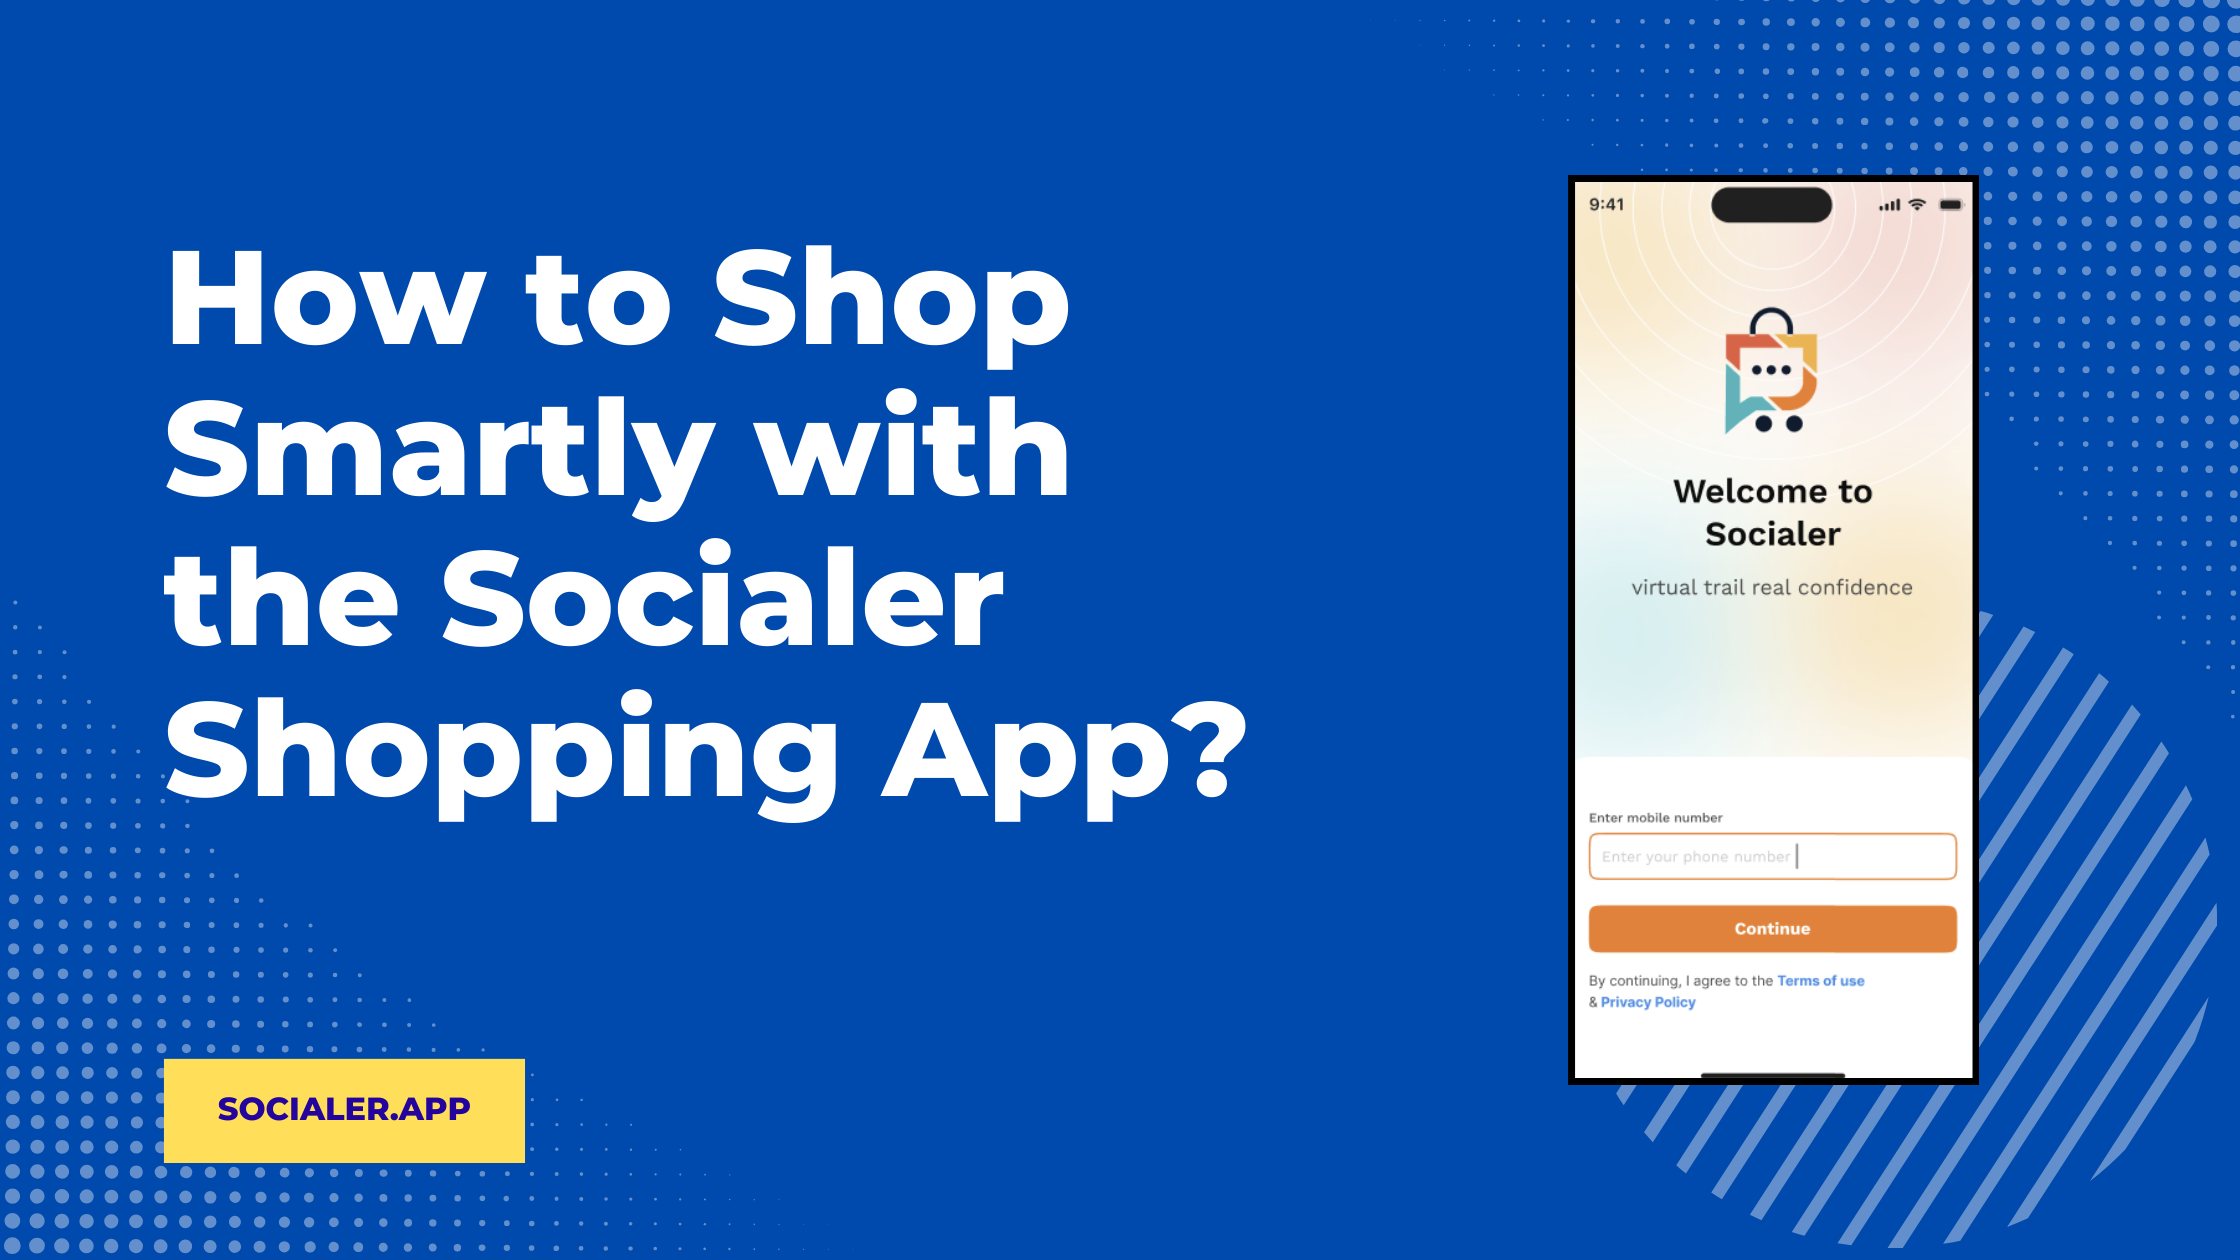 How to Shop Smartly with the Socialer Shopping App?